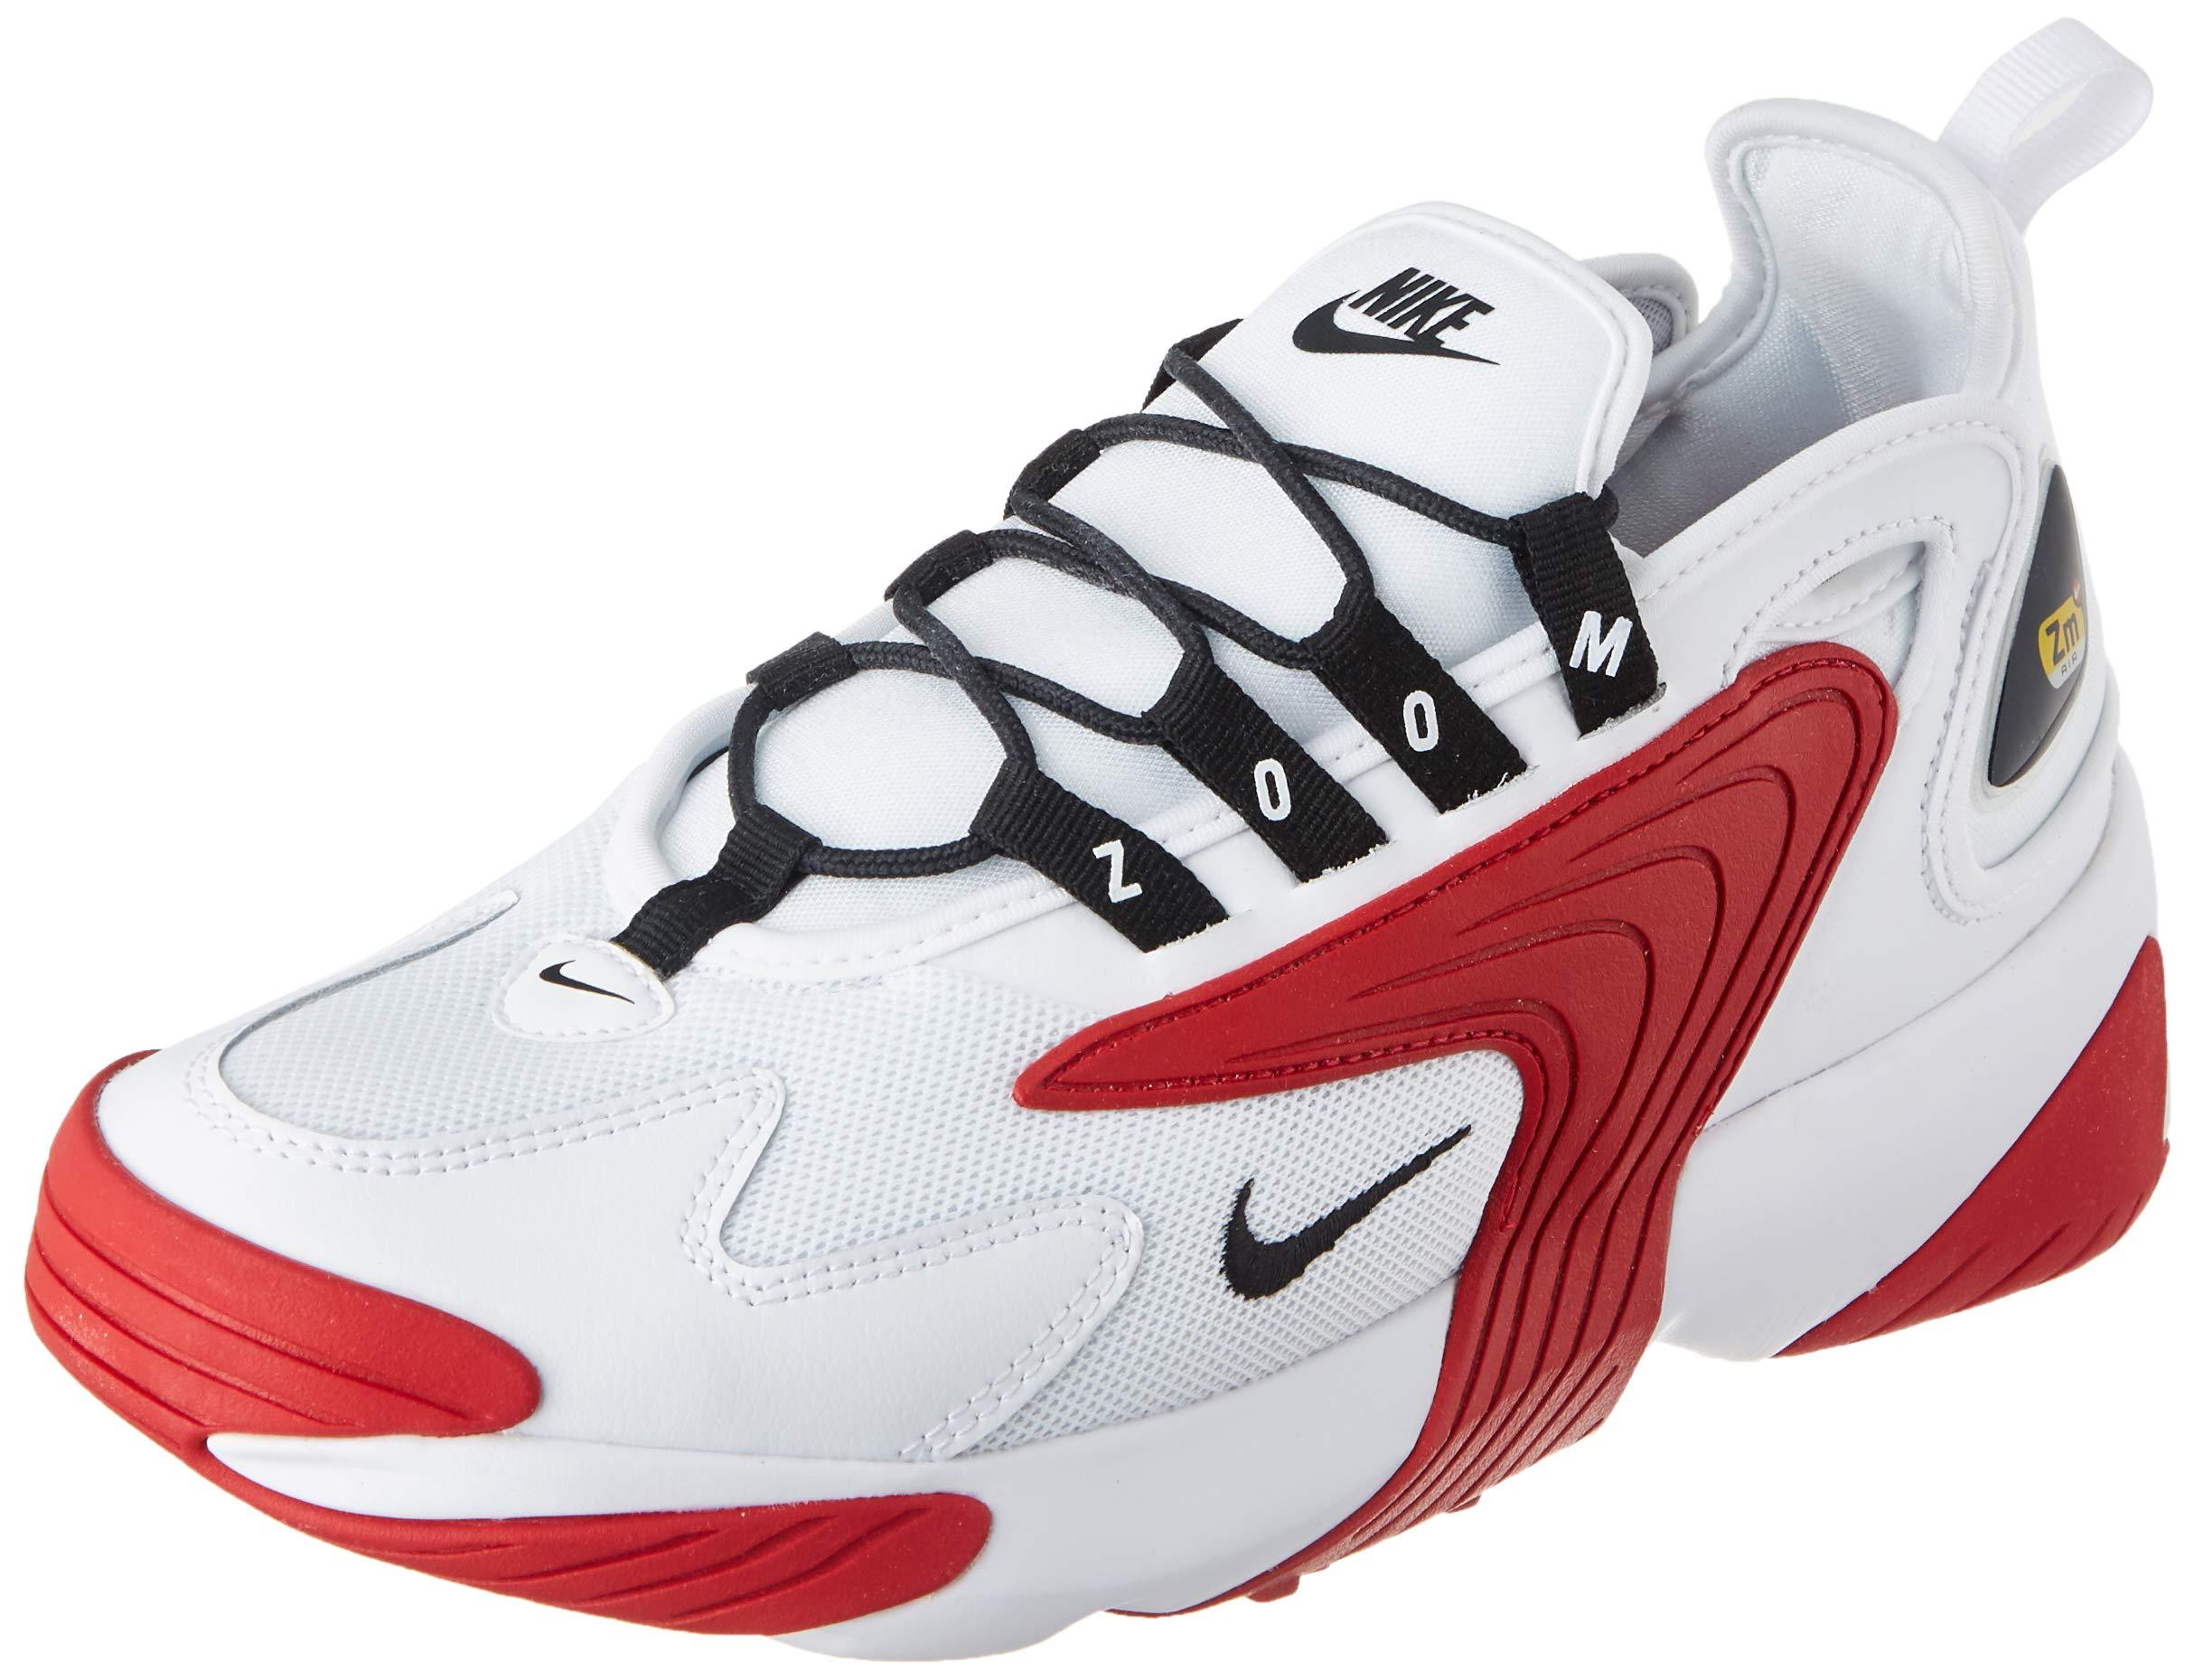 Nike Leather Zoom 2k in White for Men - Save 64% - Lyst